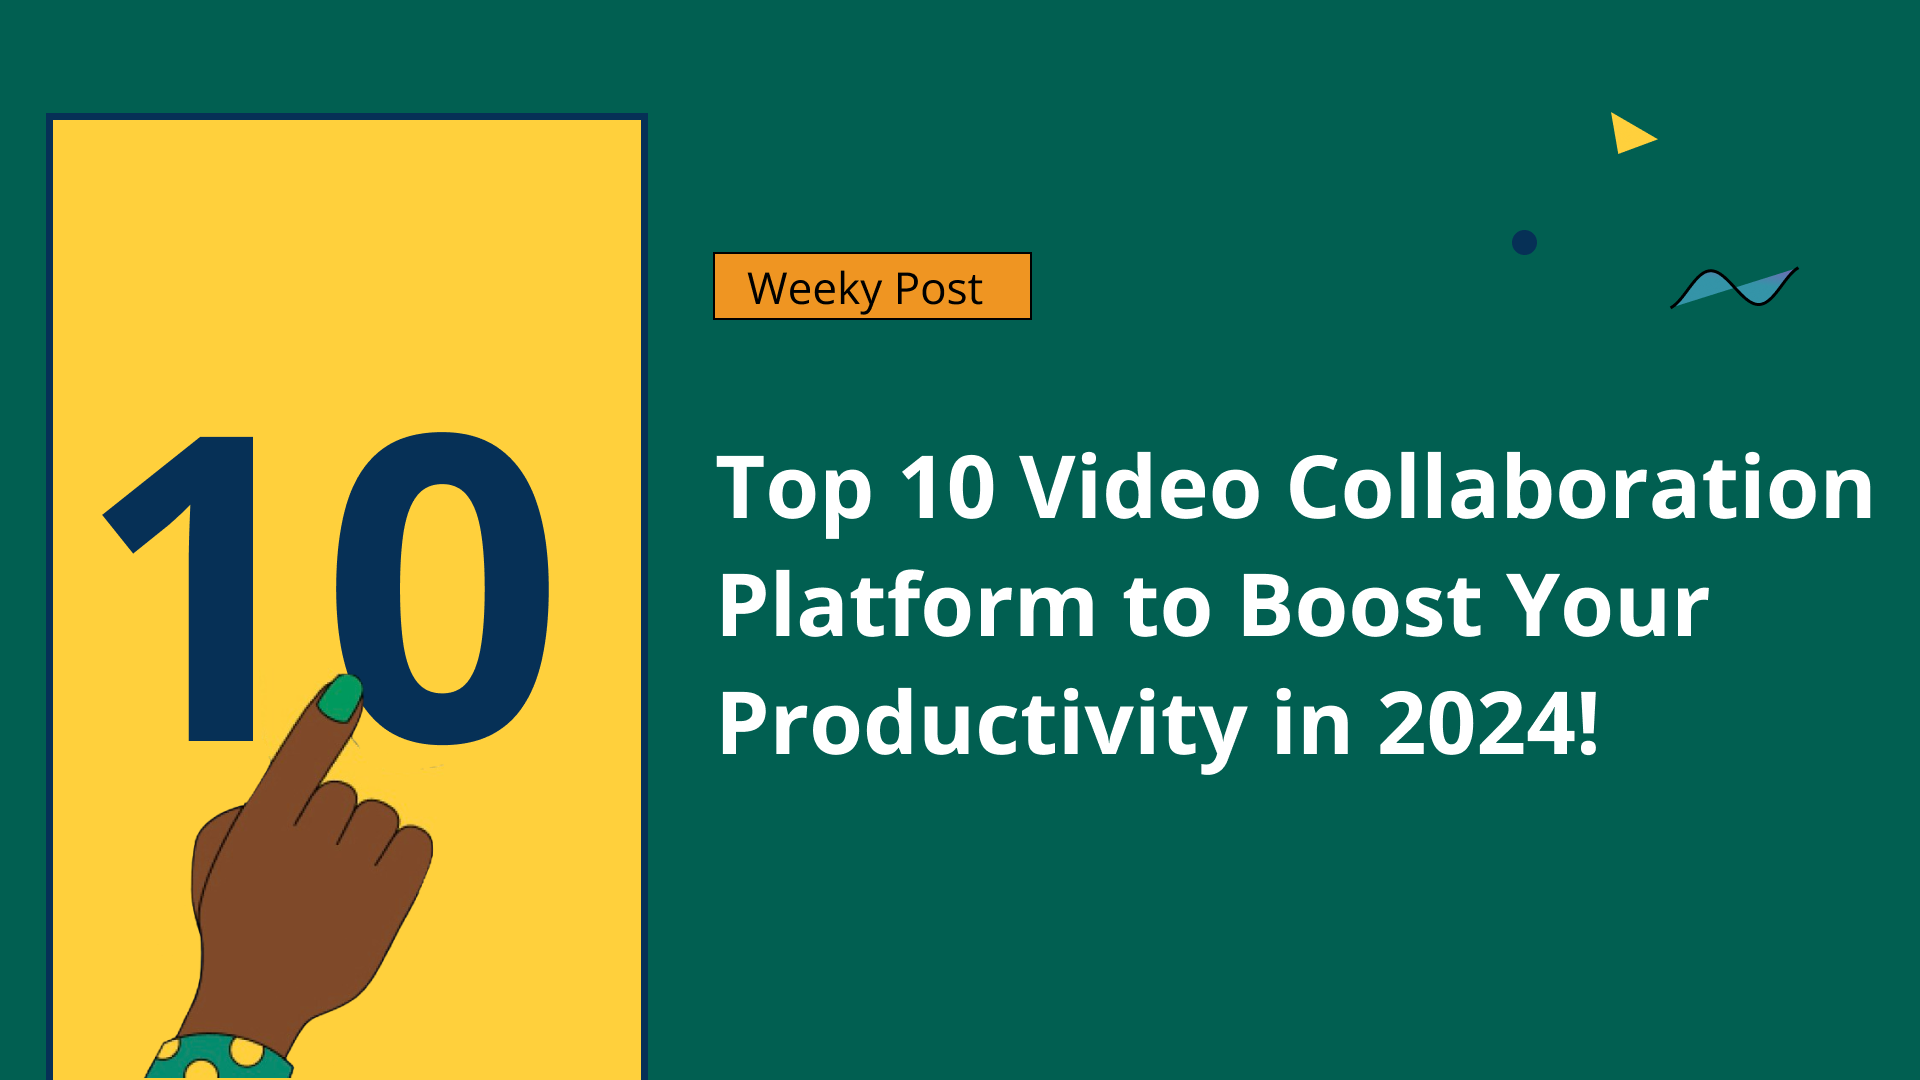 Top 10 Video Collaboration Platforms to Boost Productivity in 2024